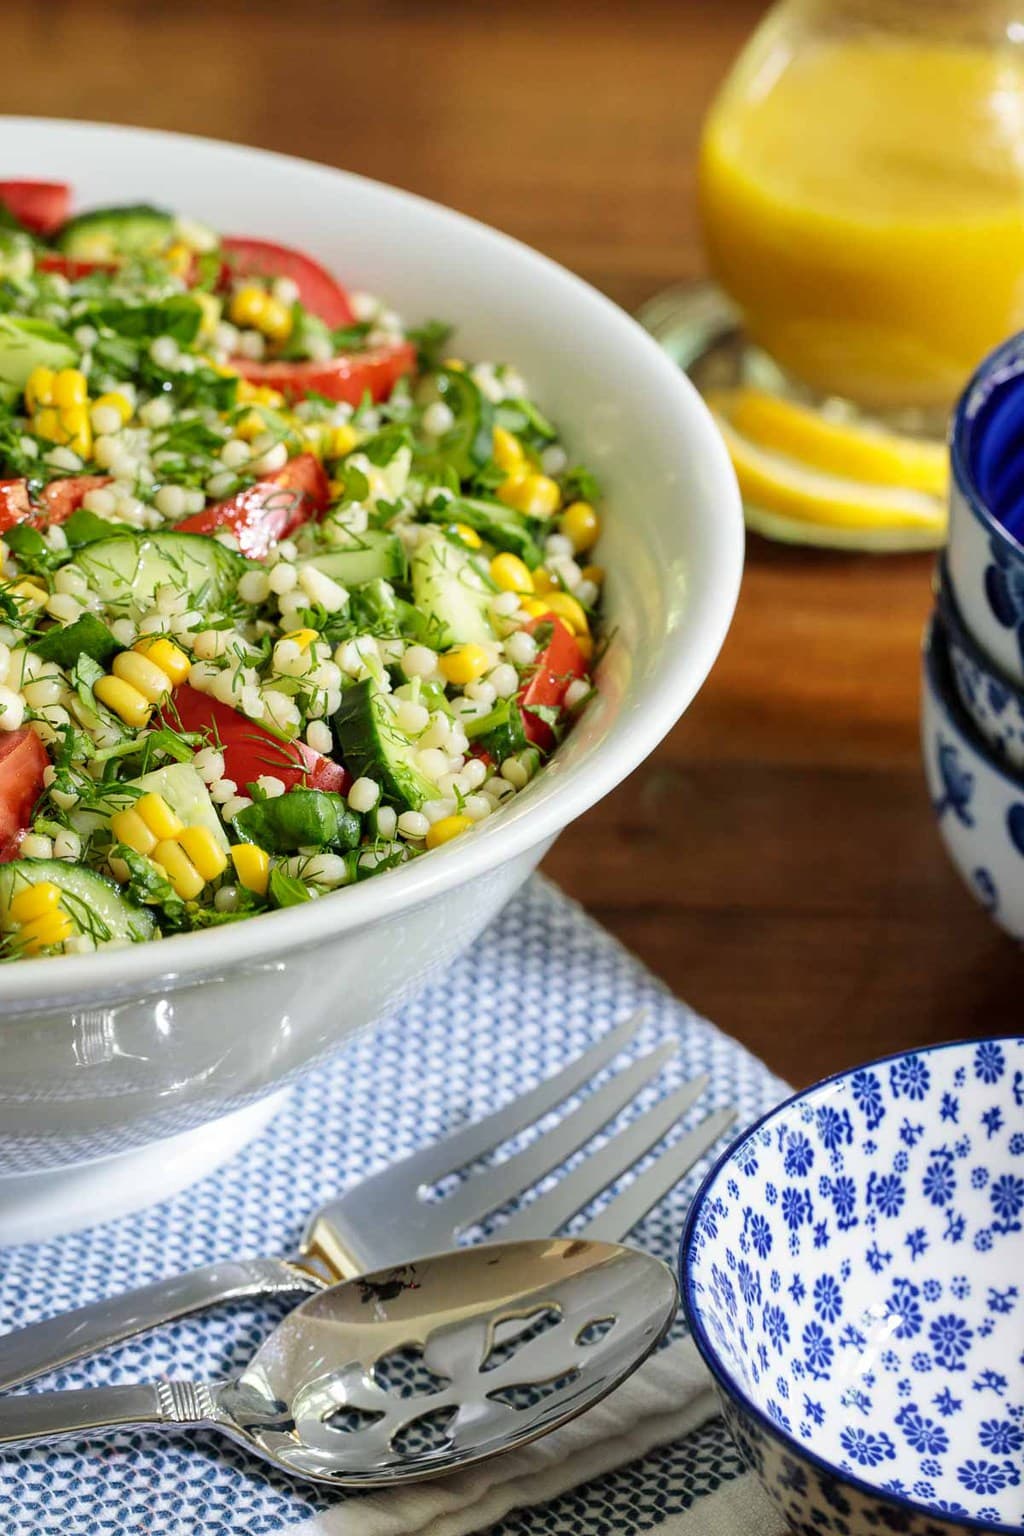 Closeup vertical photo of a Mediterranean Couscous Salad in a white serving bowl surrounded by serving accessories and a glass pitcher of lemon dressing.